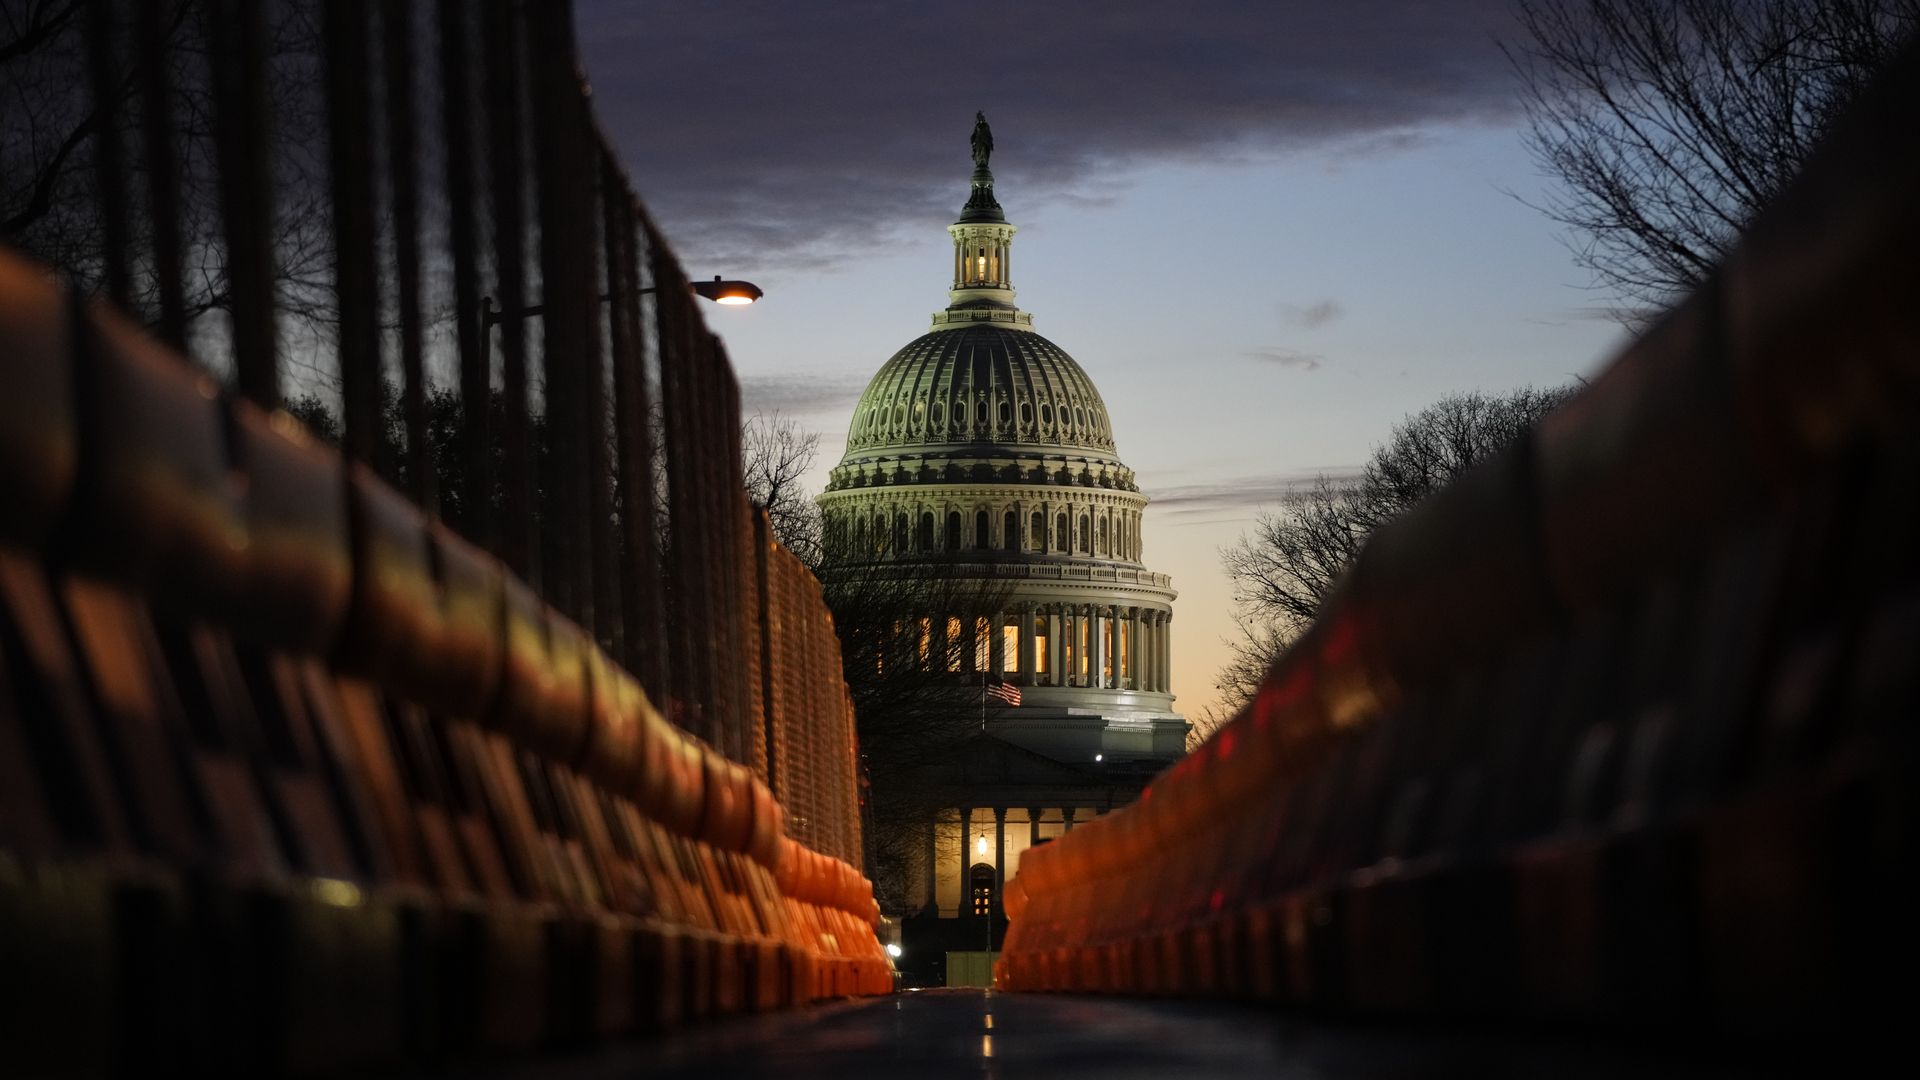 A view of the U.S. Capitol down East Capitol Street at sunset on January 5, 2022 in Washington, D.C.